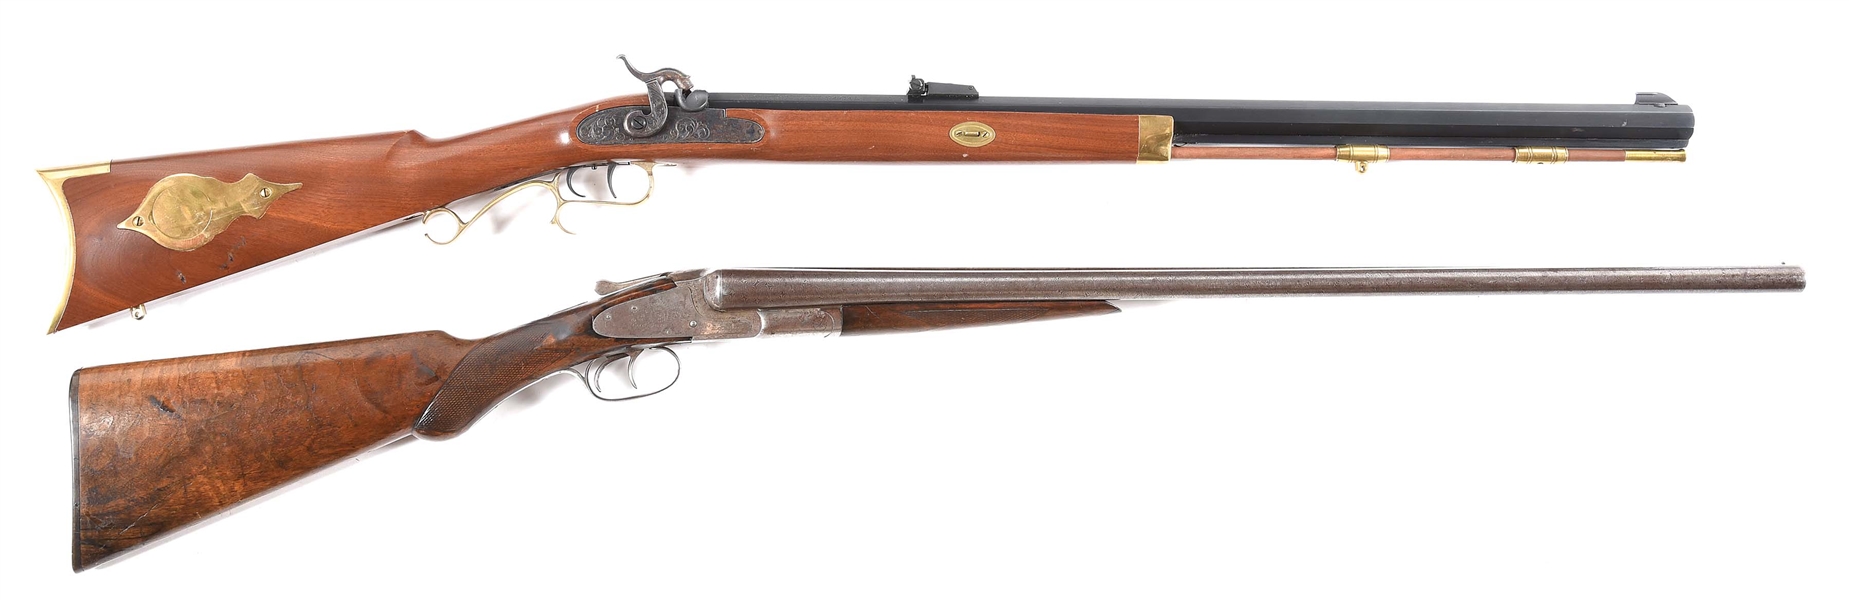 (A) LOT OF TWO: THOMPSON CENTER ARMS HAWKEYE PERCUSSION RIFLE AND L.C. BLACK POWDER DOUBLE BARREL SHOTGUN